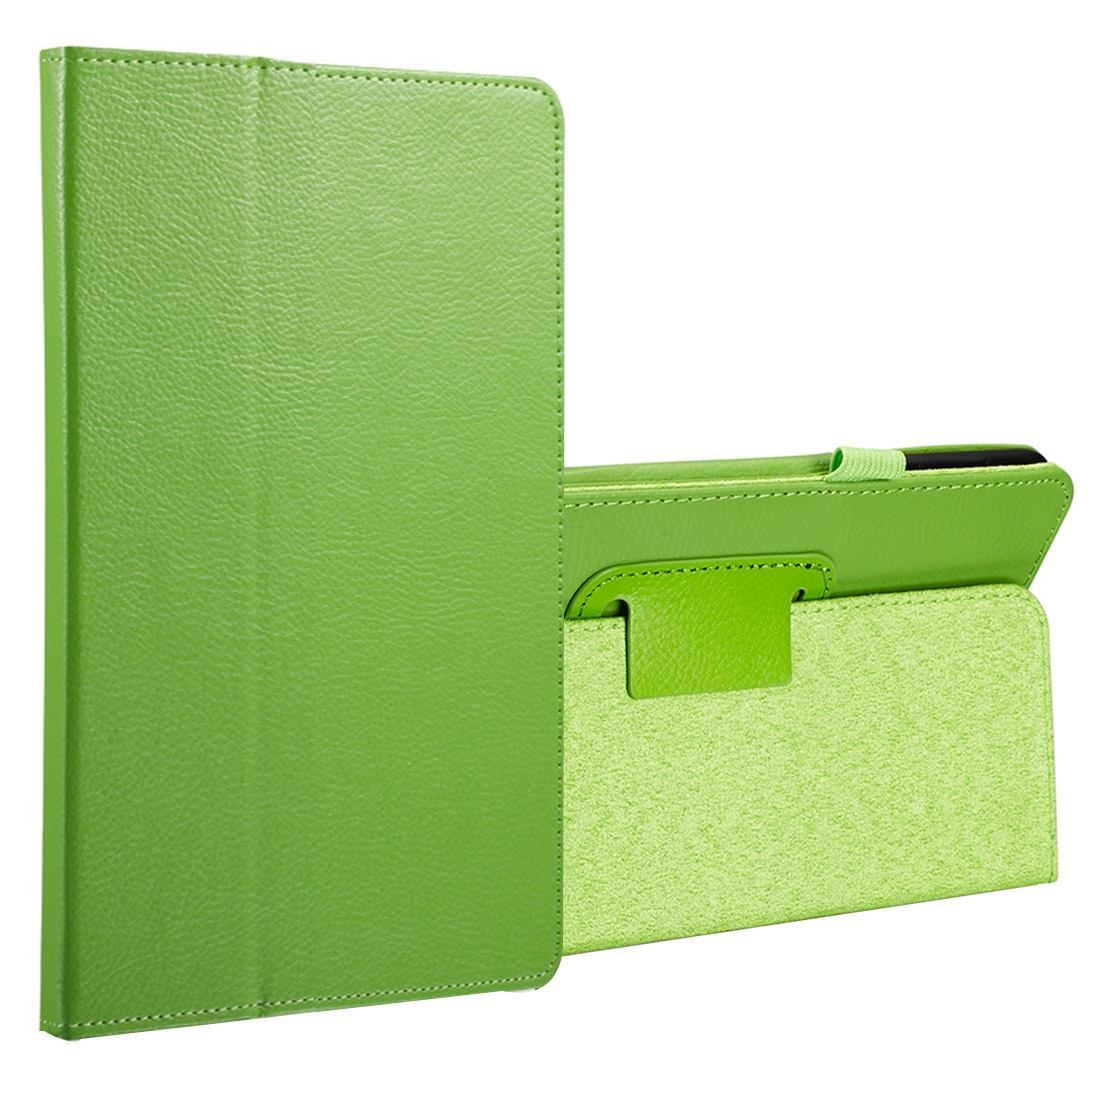 For Samsung Galaxy Tab A 8.0 SM-T380,T385 Case,Lychee Leather Cover,Green